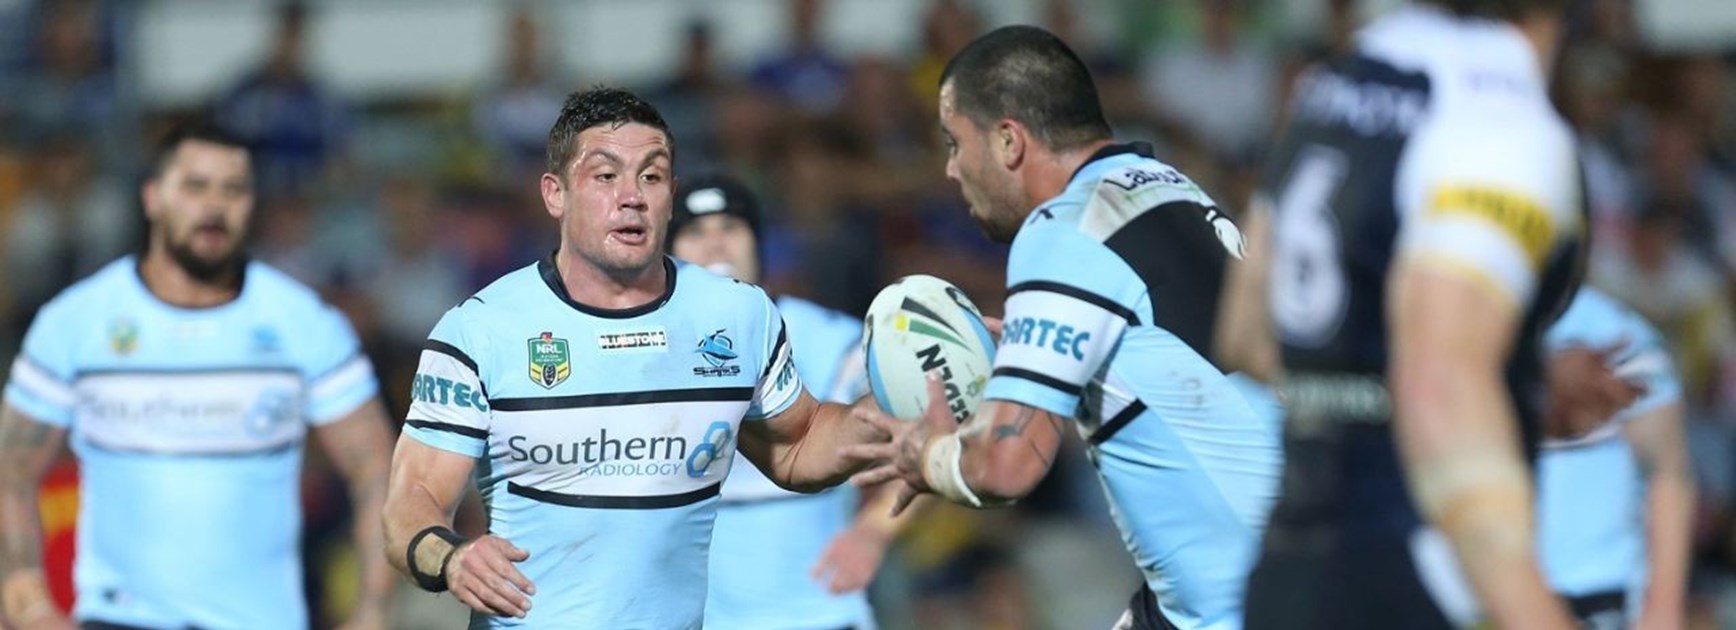 Chris Heighington feeds Andrew Fifita :	Rugby League, NRL Round 16 North Queensland Cowboys v Cronulla Sutherland Sharks at Townsville, Saturday June 27 2015. Digital Image by Colin Whelan Â© nrlphotos.com